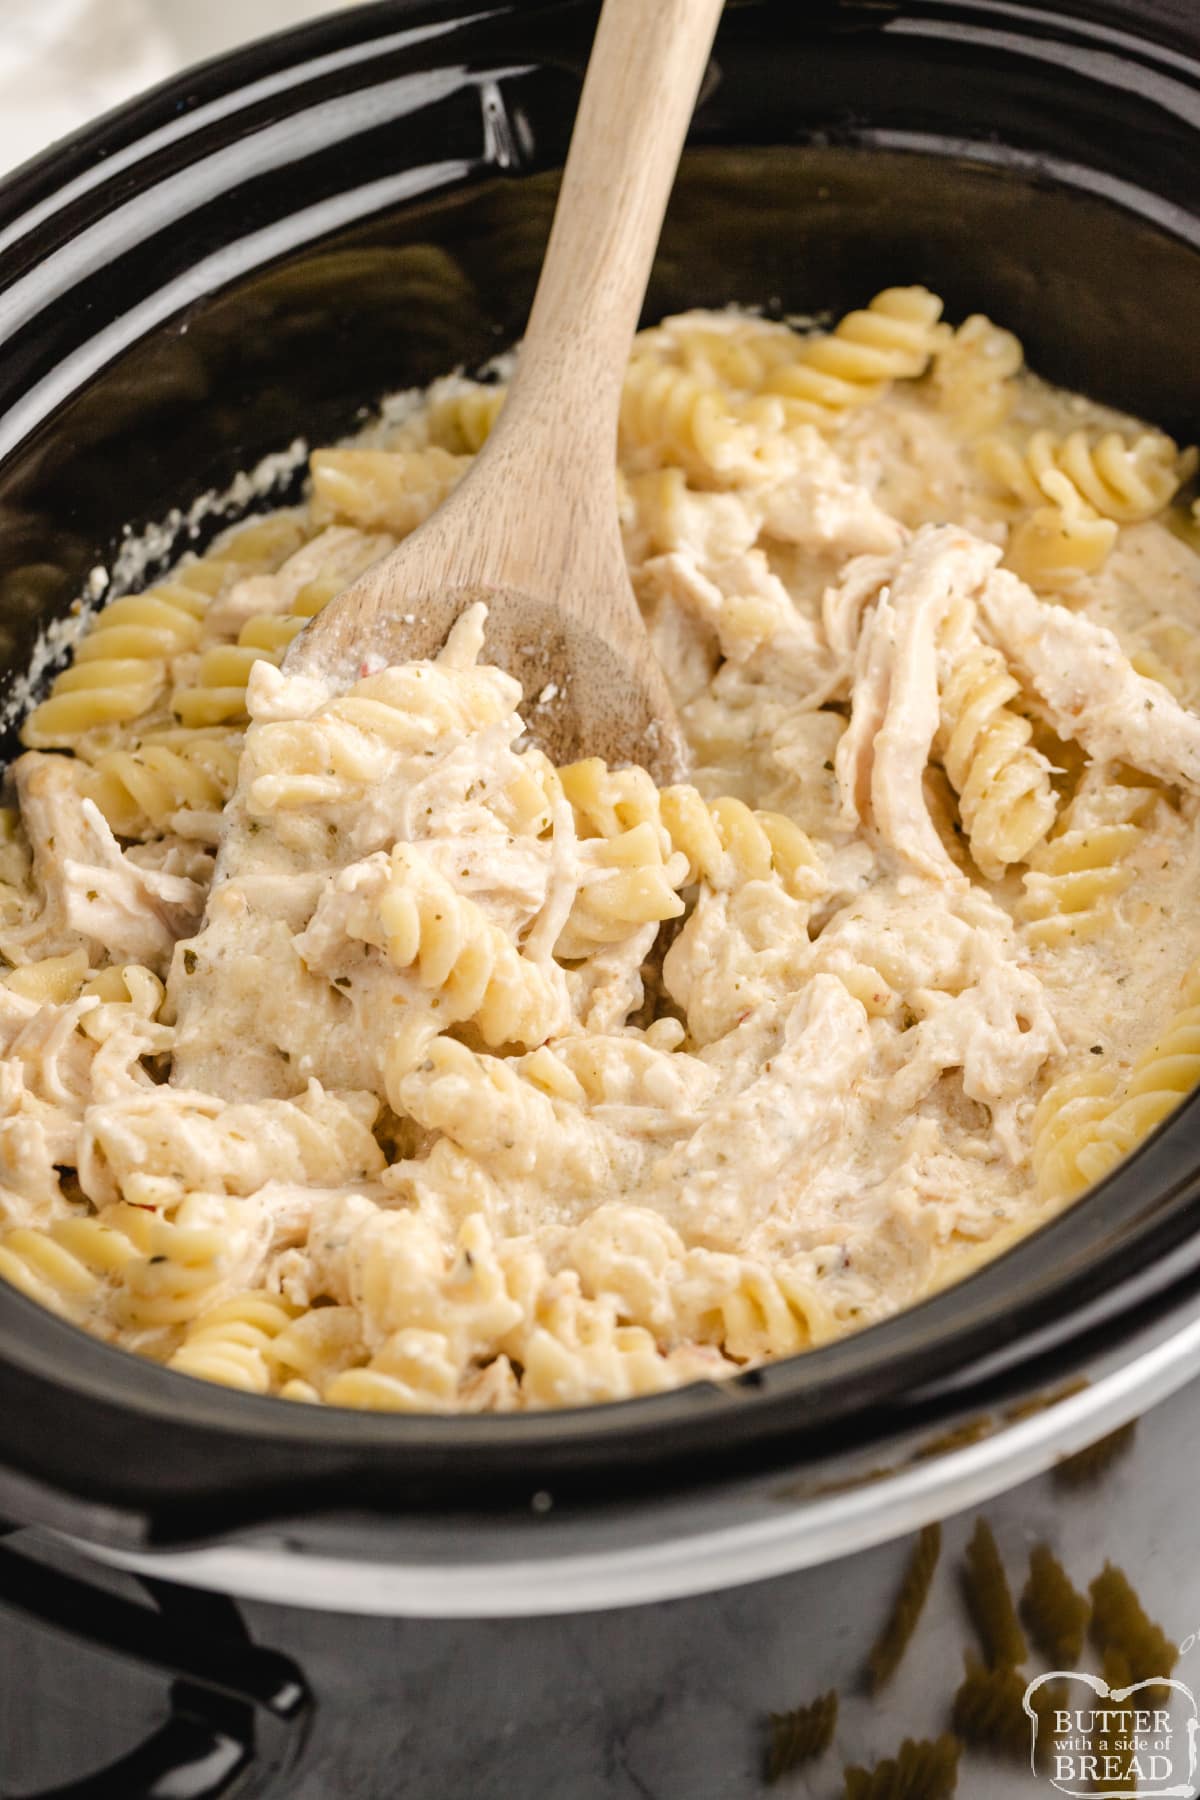 Crockpot Garlic Parmesan Chicken Pasta is made with 6 ingredients and only a few minutes of prep time. Easy weeknight dinner recipe that everyone loves! 